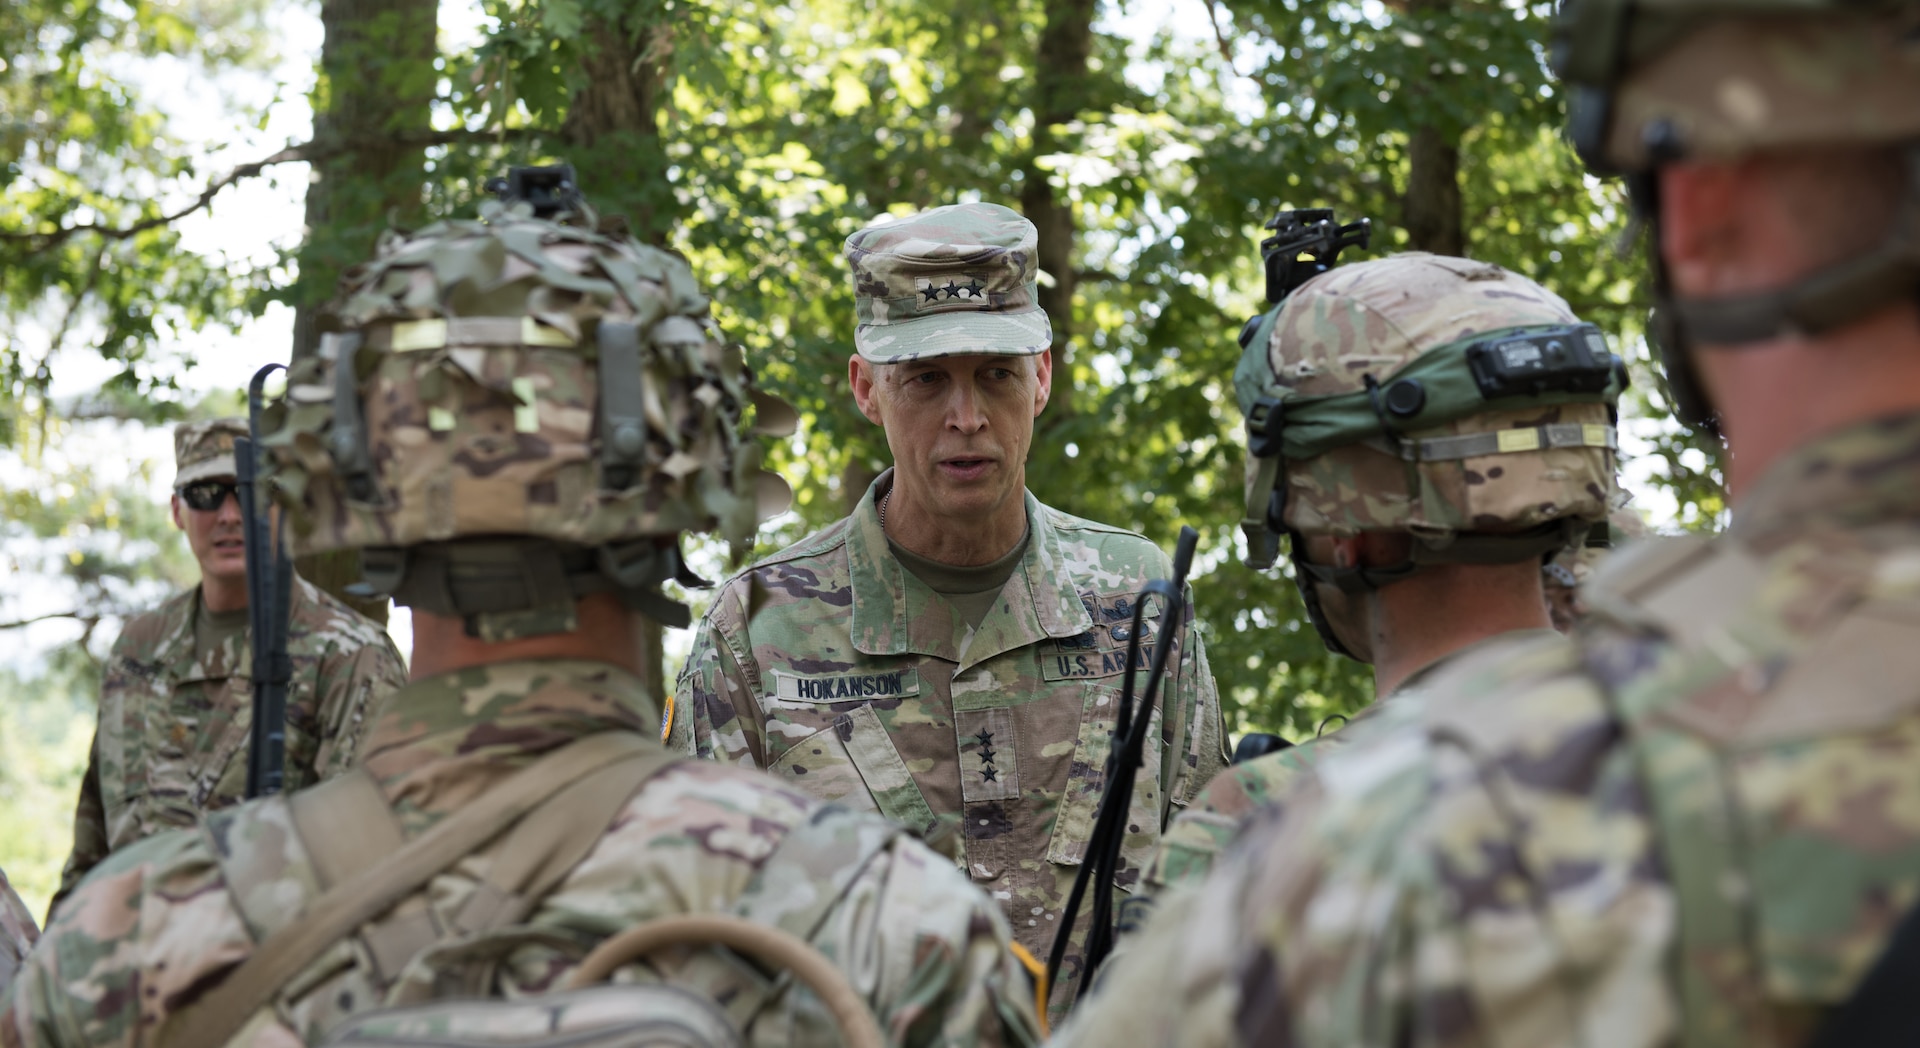 Lt. Gen. Daniel Hokanson, nominated May 4, 2020, to be the next chief of the National Guard Bureau, accompanies Gen. James C. McConville, vice chief of staff of the Army, to Fort Pickett, Virginia, July 19, 2019, to see Soldiers of the Virginia National Guard’s 116th IBCT training in preparation for their Joint Readiness Training Center rotation.